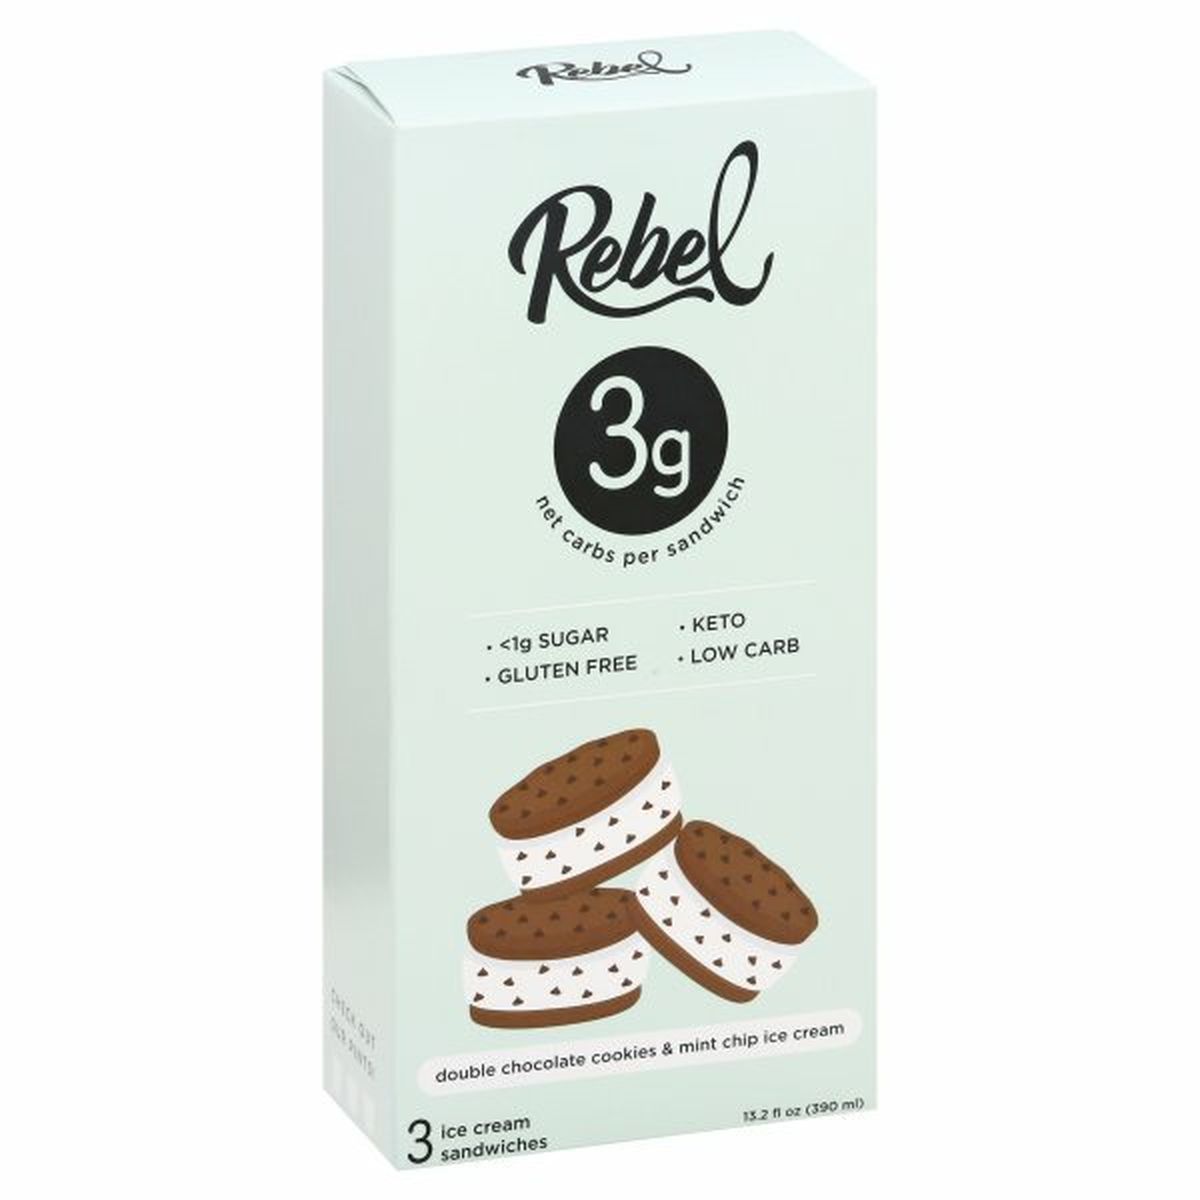 Calories in Rebel Ice Cream Sandwiches, Double Chocolate Cookies & Mint Chip